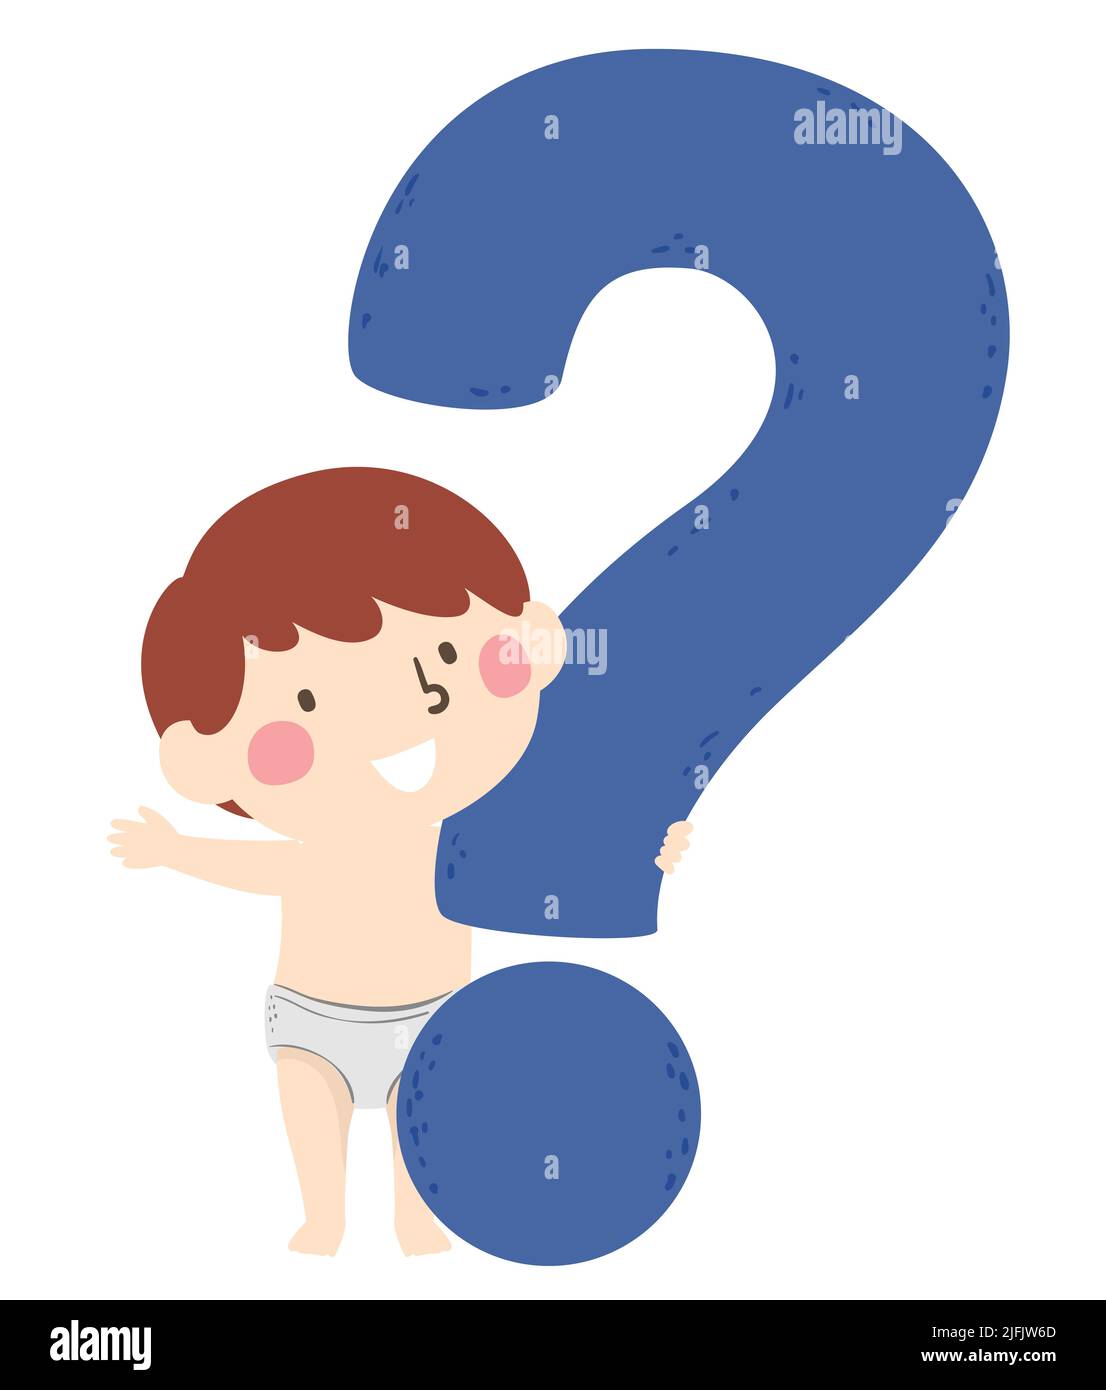 Illustration of Kid Boy Wearing White Briefs, Standing and Holding Big Question Mark Stock Photo